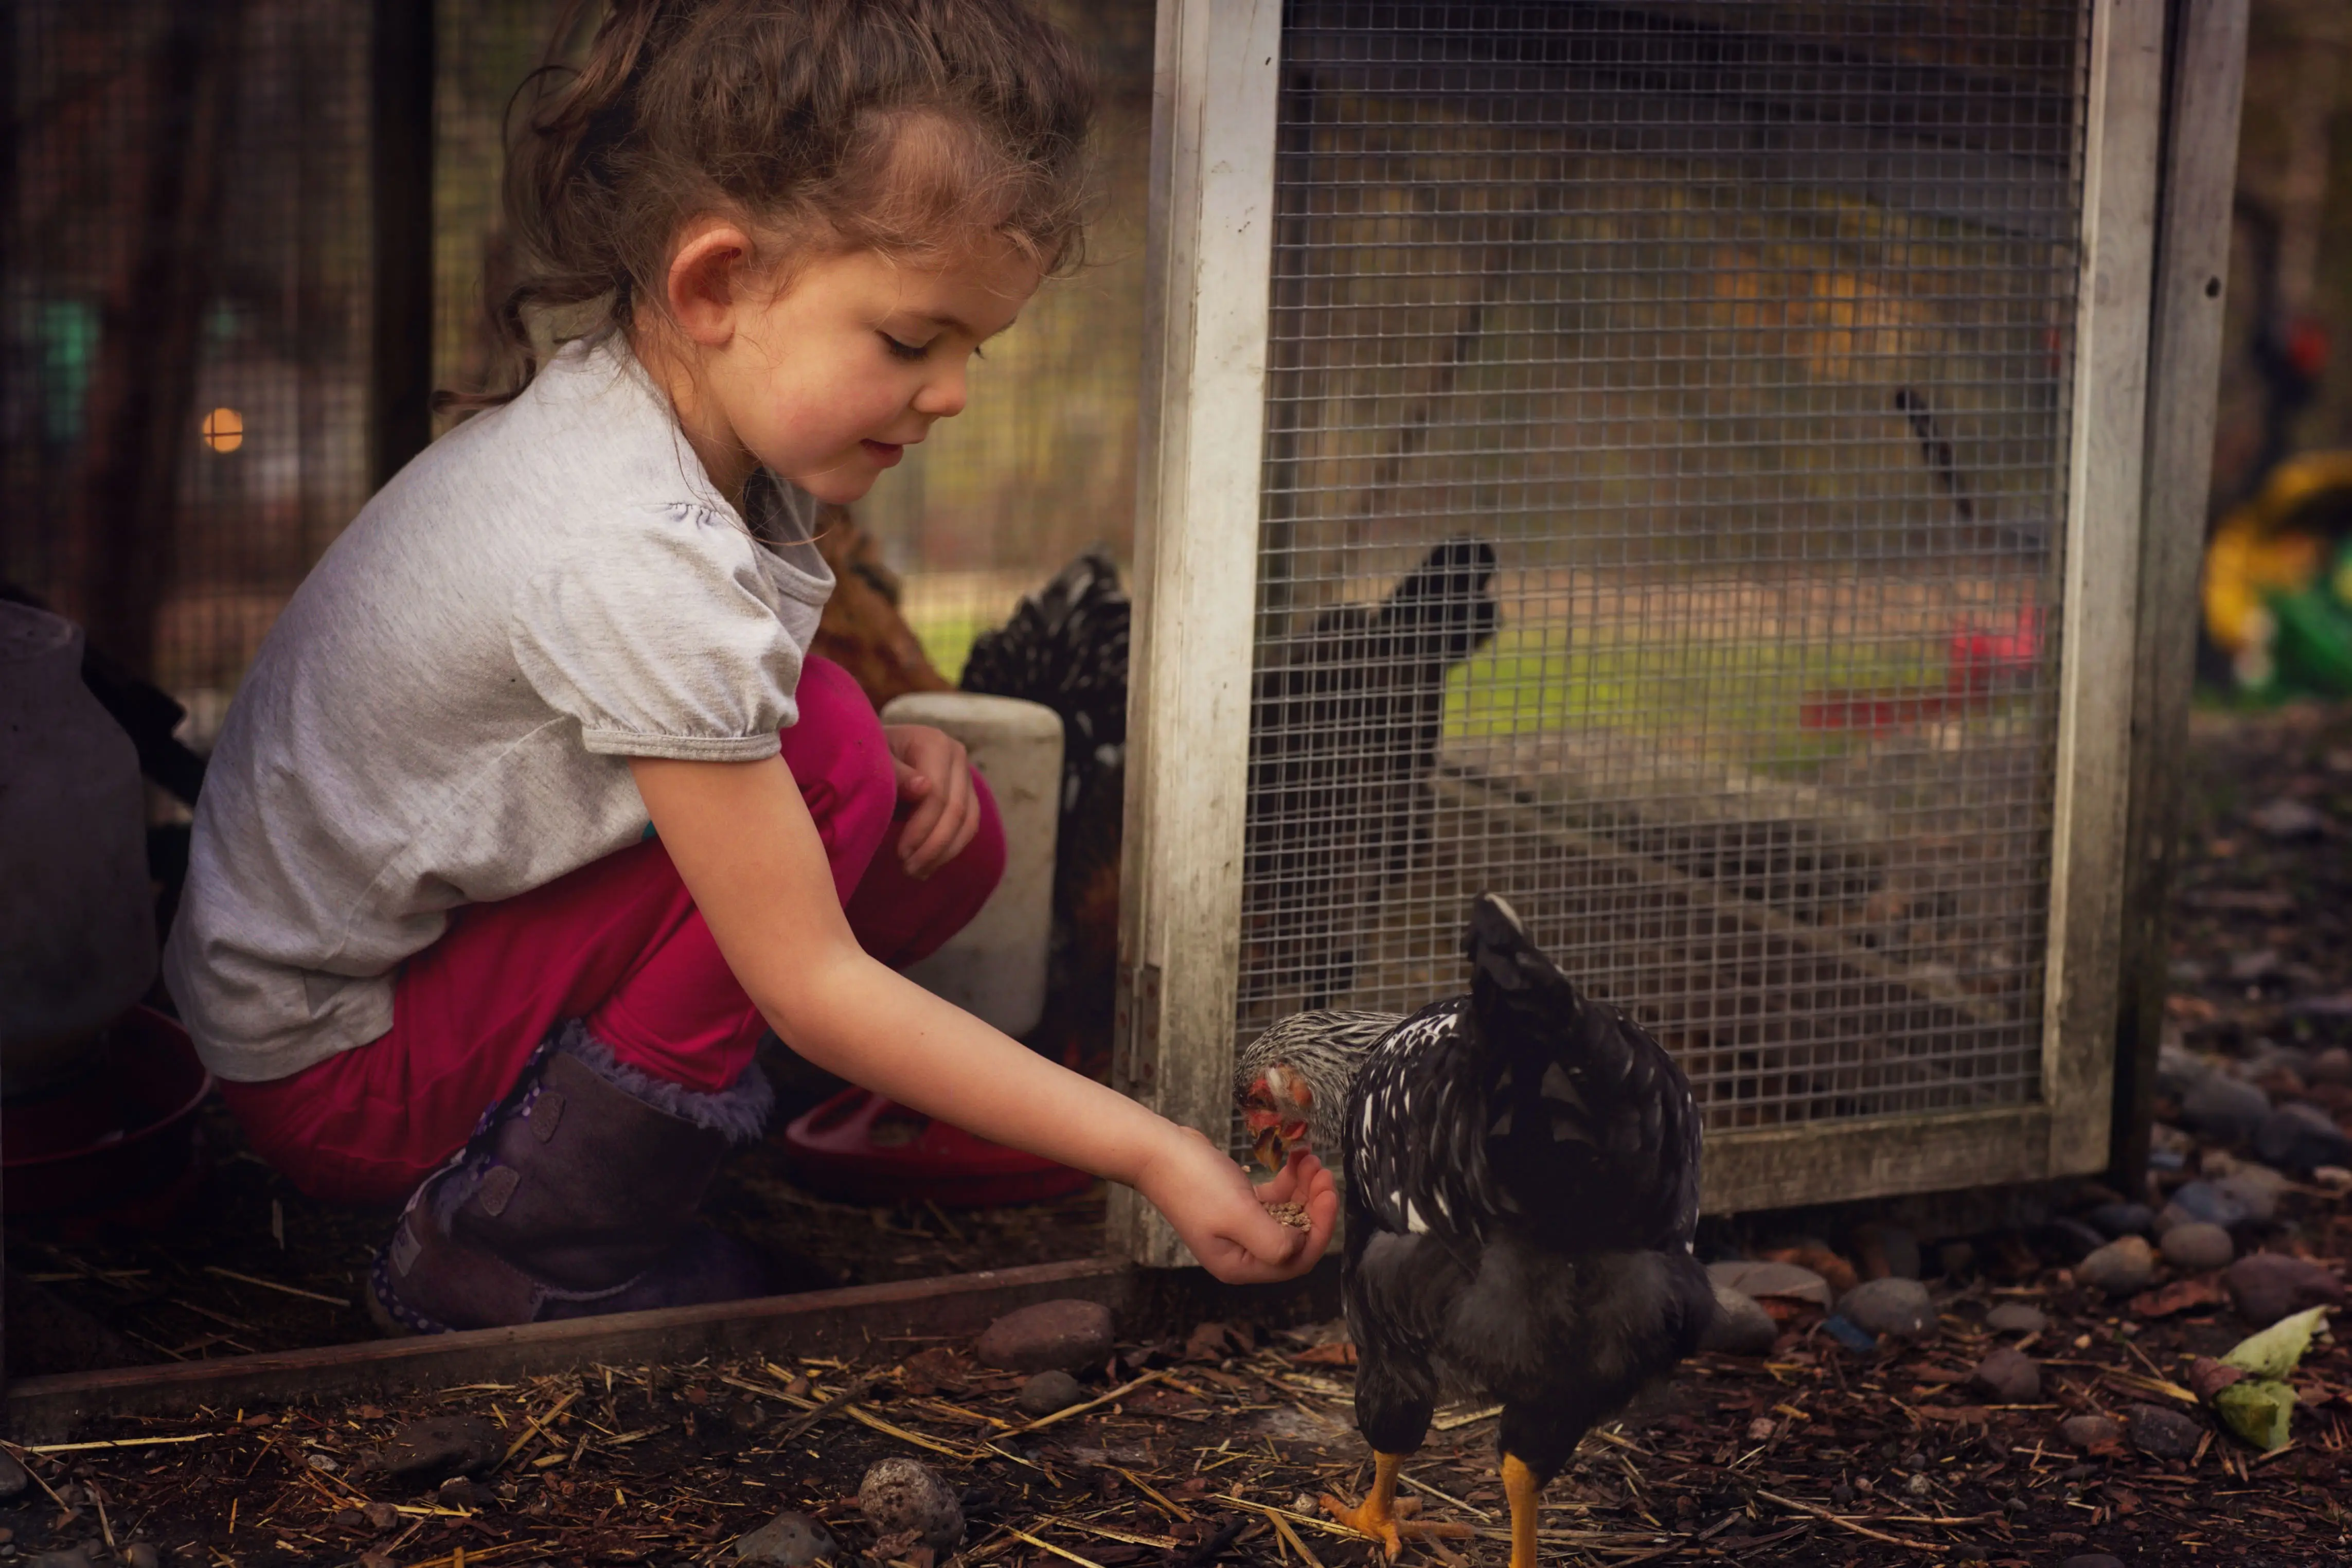 A little girl taking care of a chicken